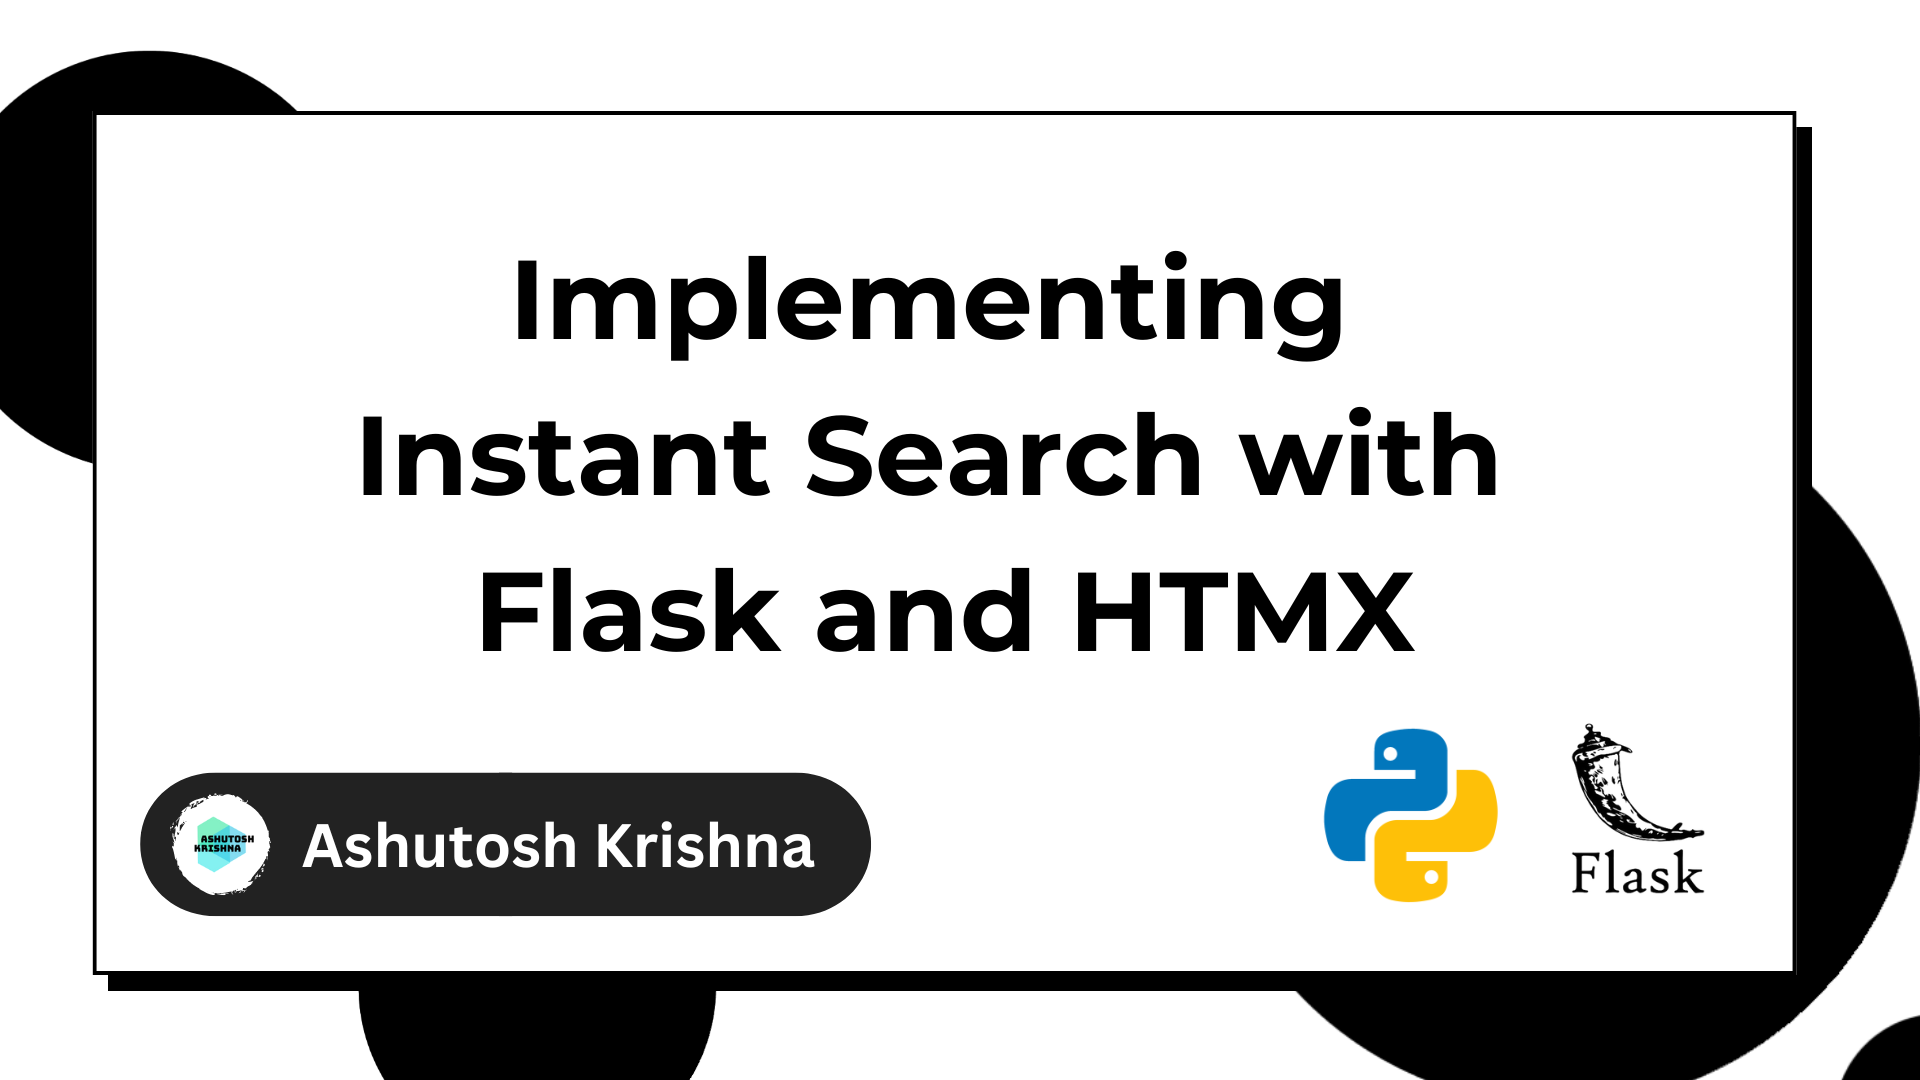 How To Implement Instant Search with Flask and HTMX